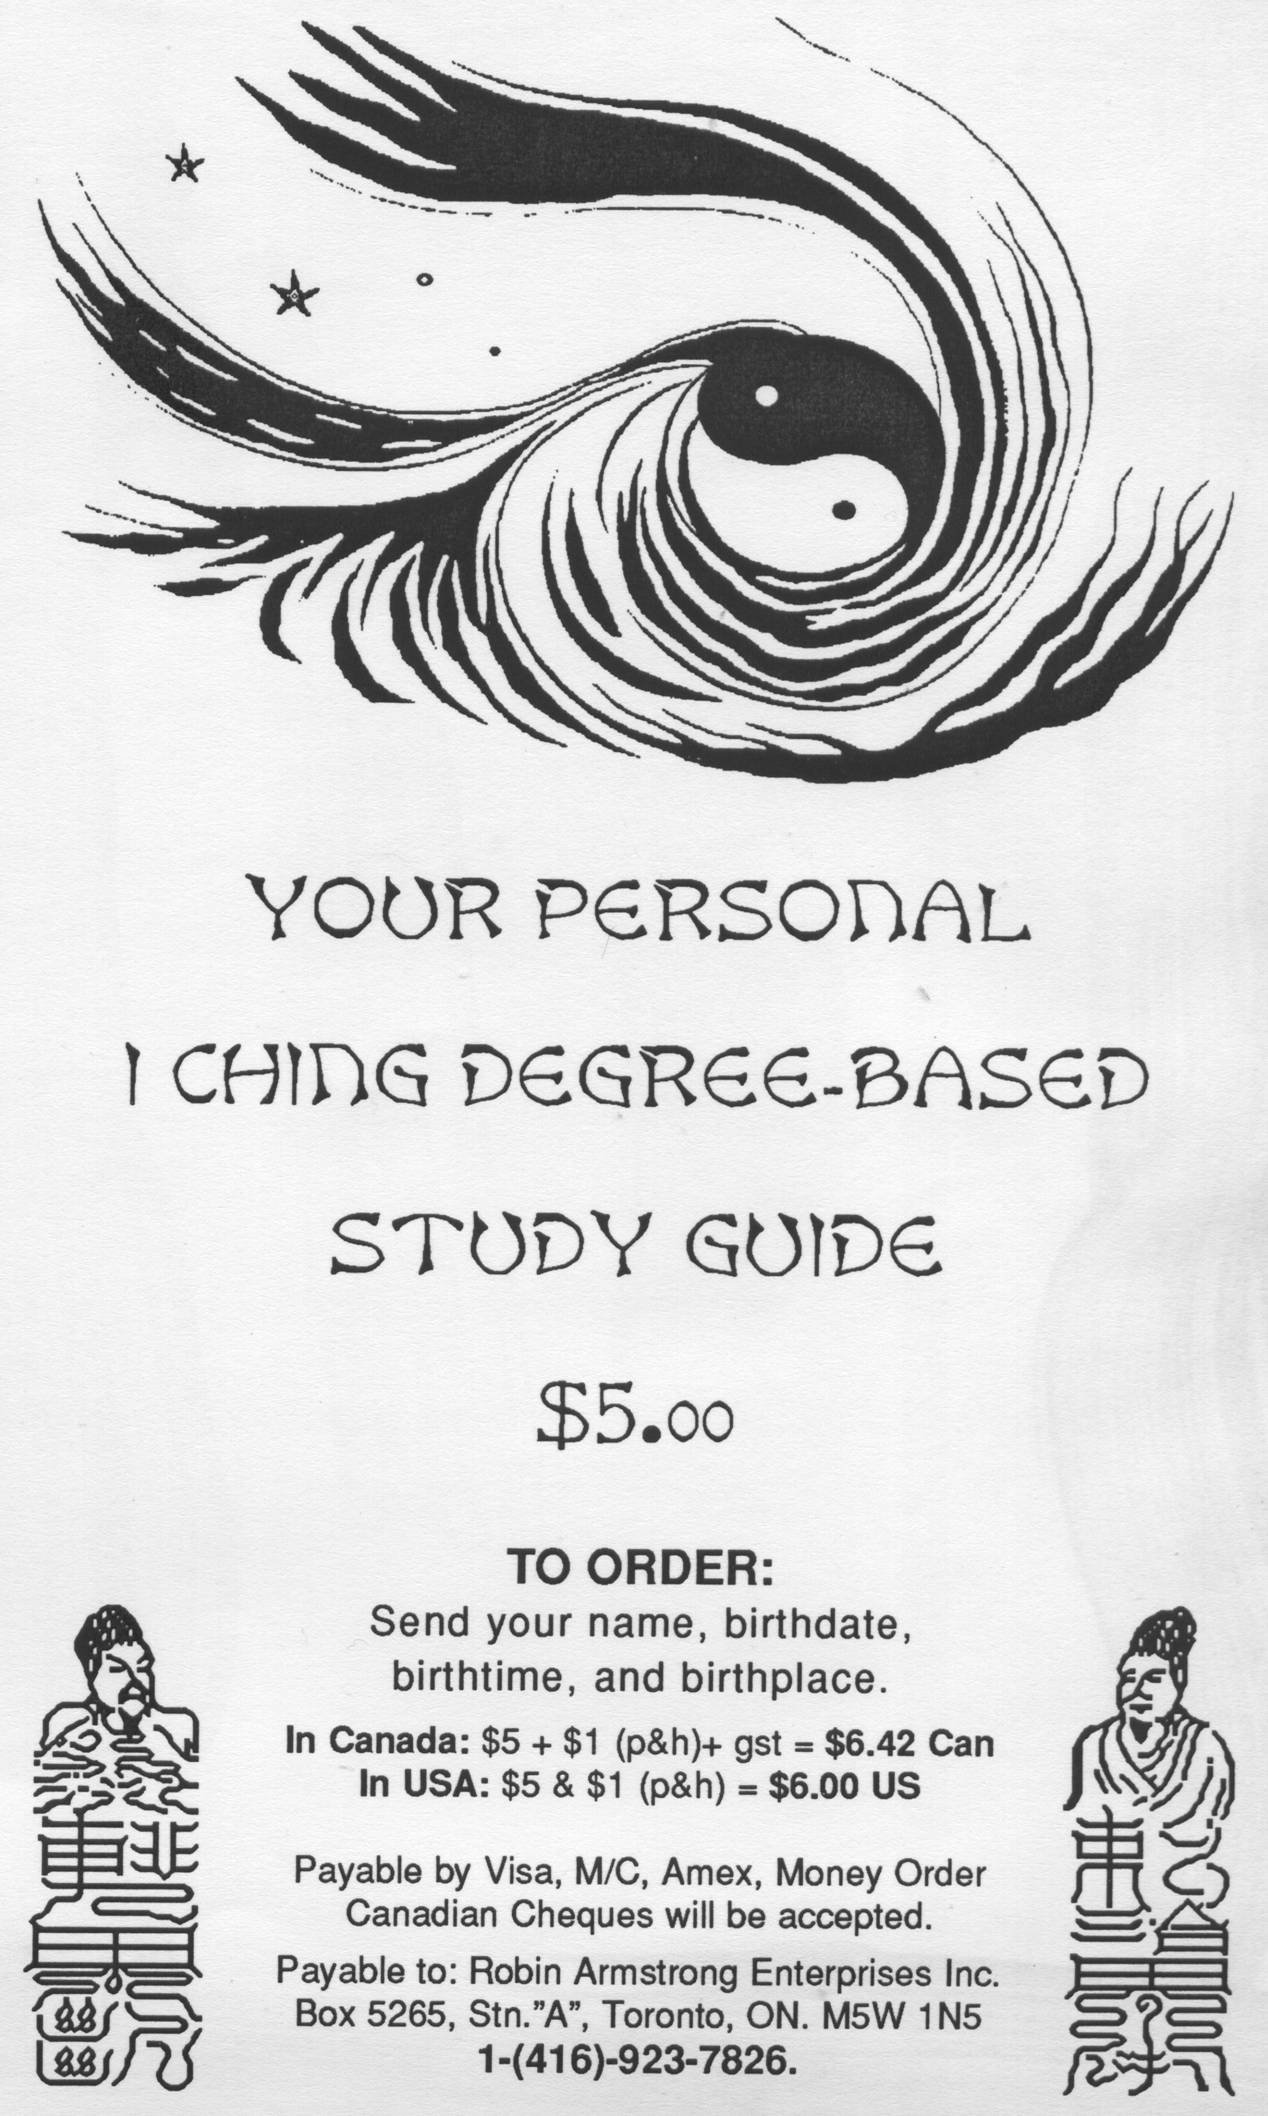 I Ching Study Guide Ad